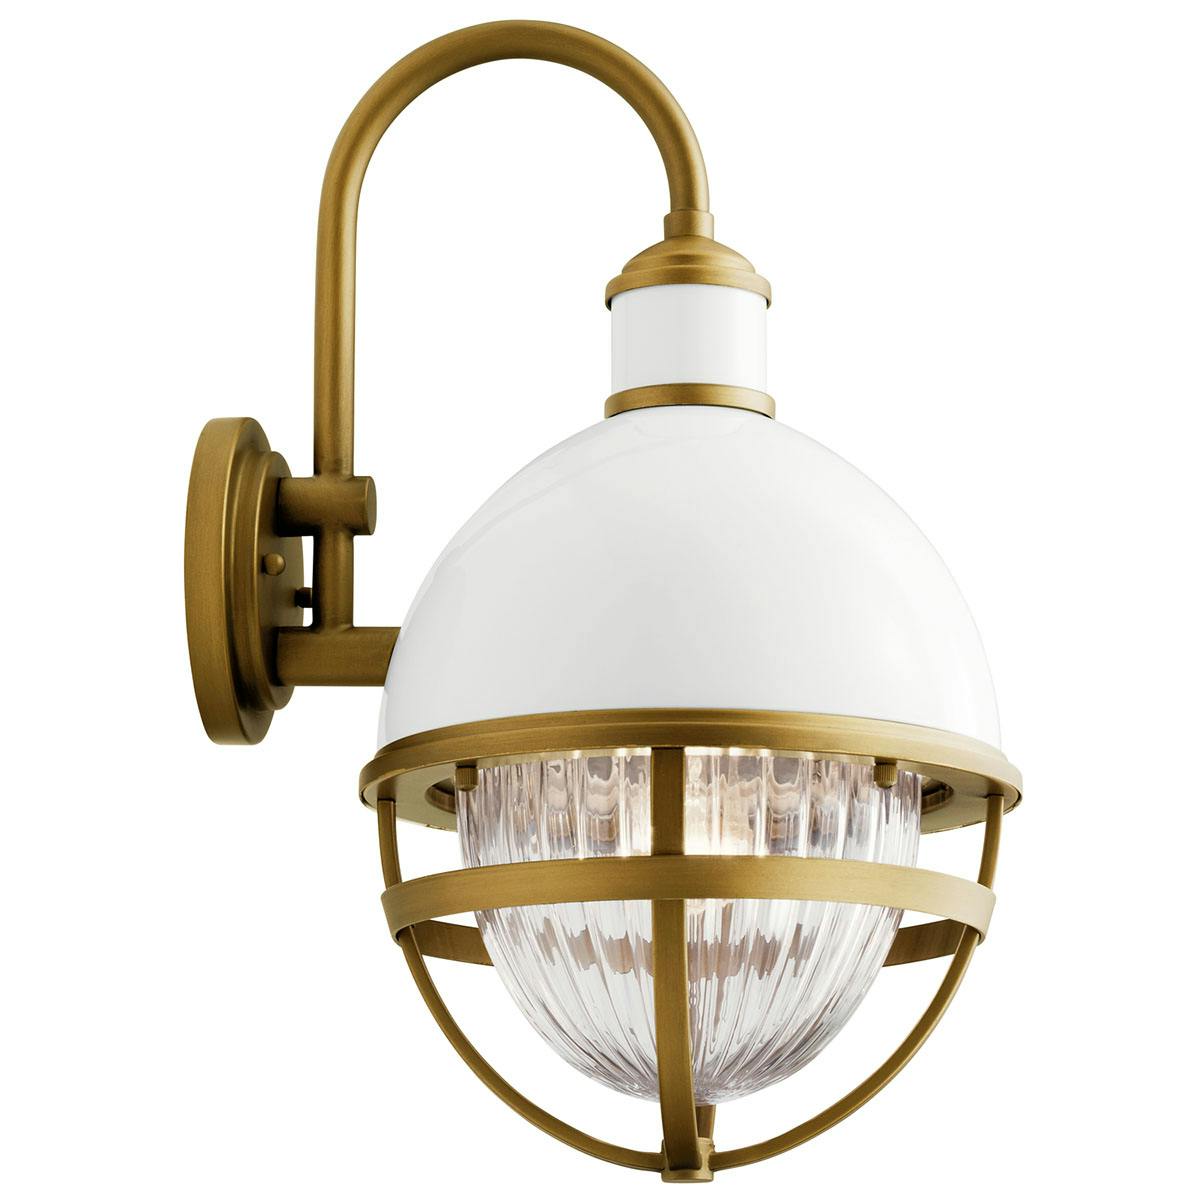 Profile view of the Tollis 18.50" Wall Light White and Brass on a white background